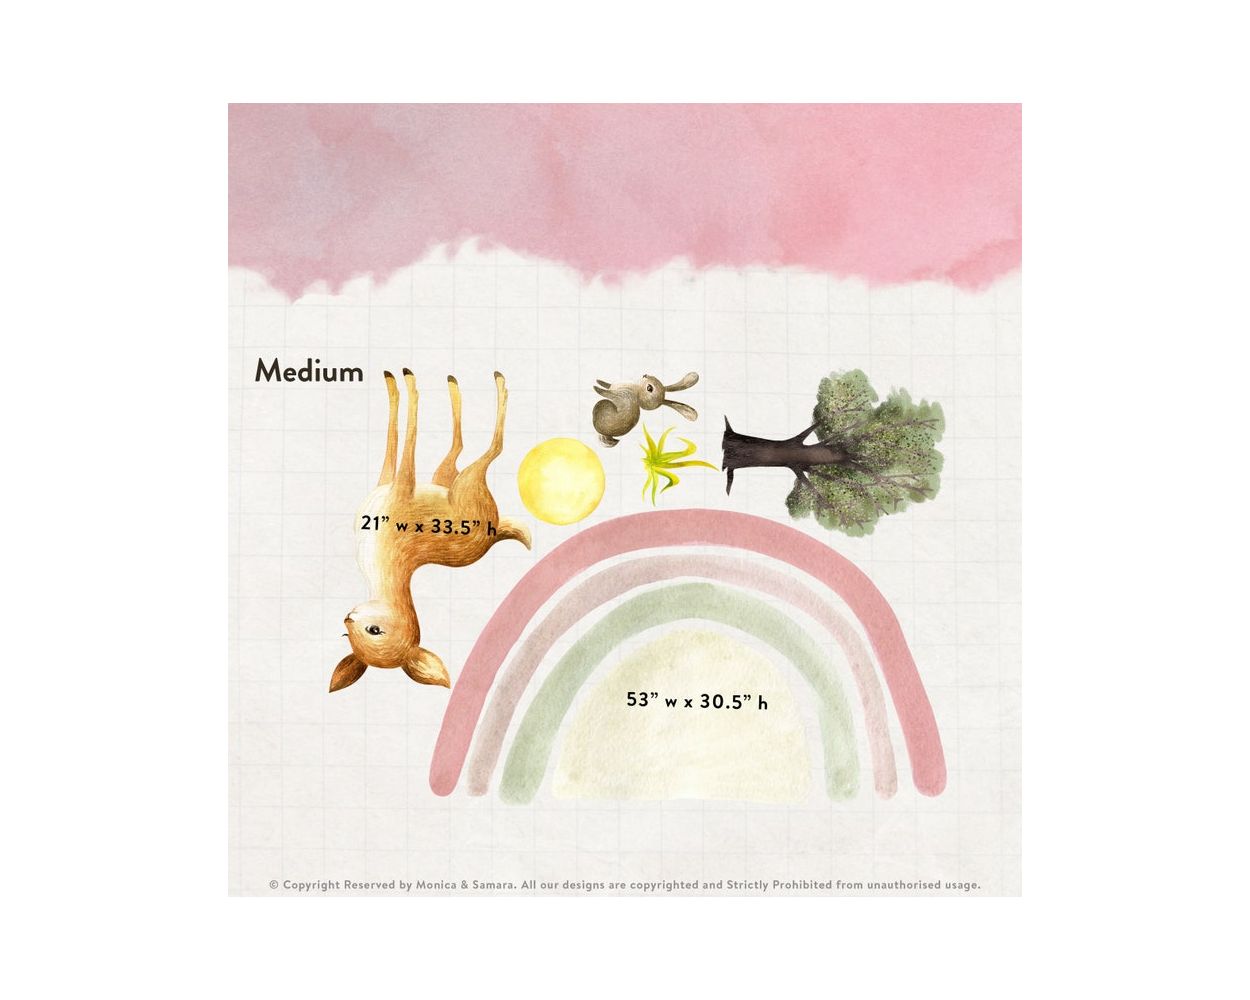 Cute and Best Boho Rainbow, Deer Animal and Rabbit Watercolour Vinyl Wall Stickers for Kids Bedroom wall decor